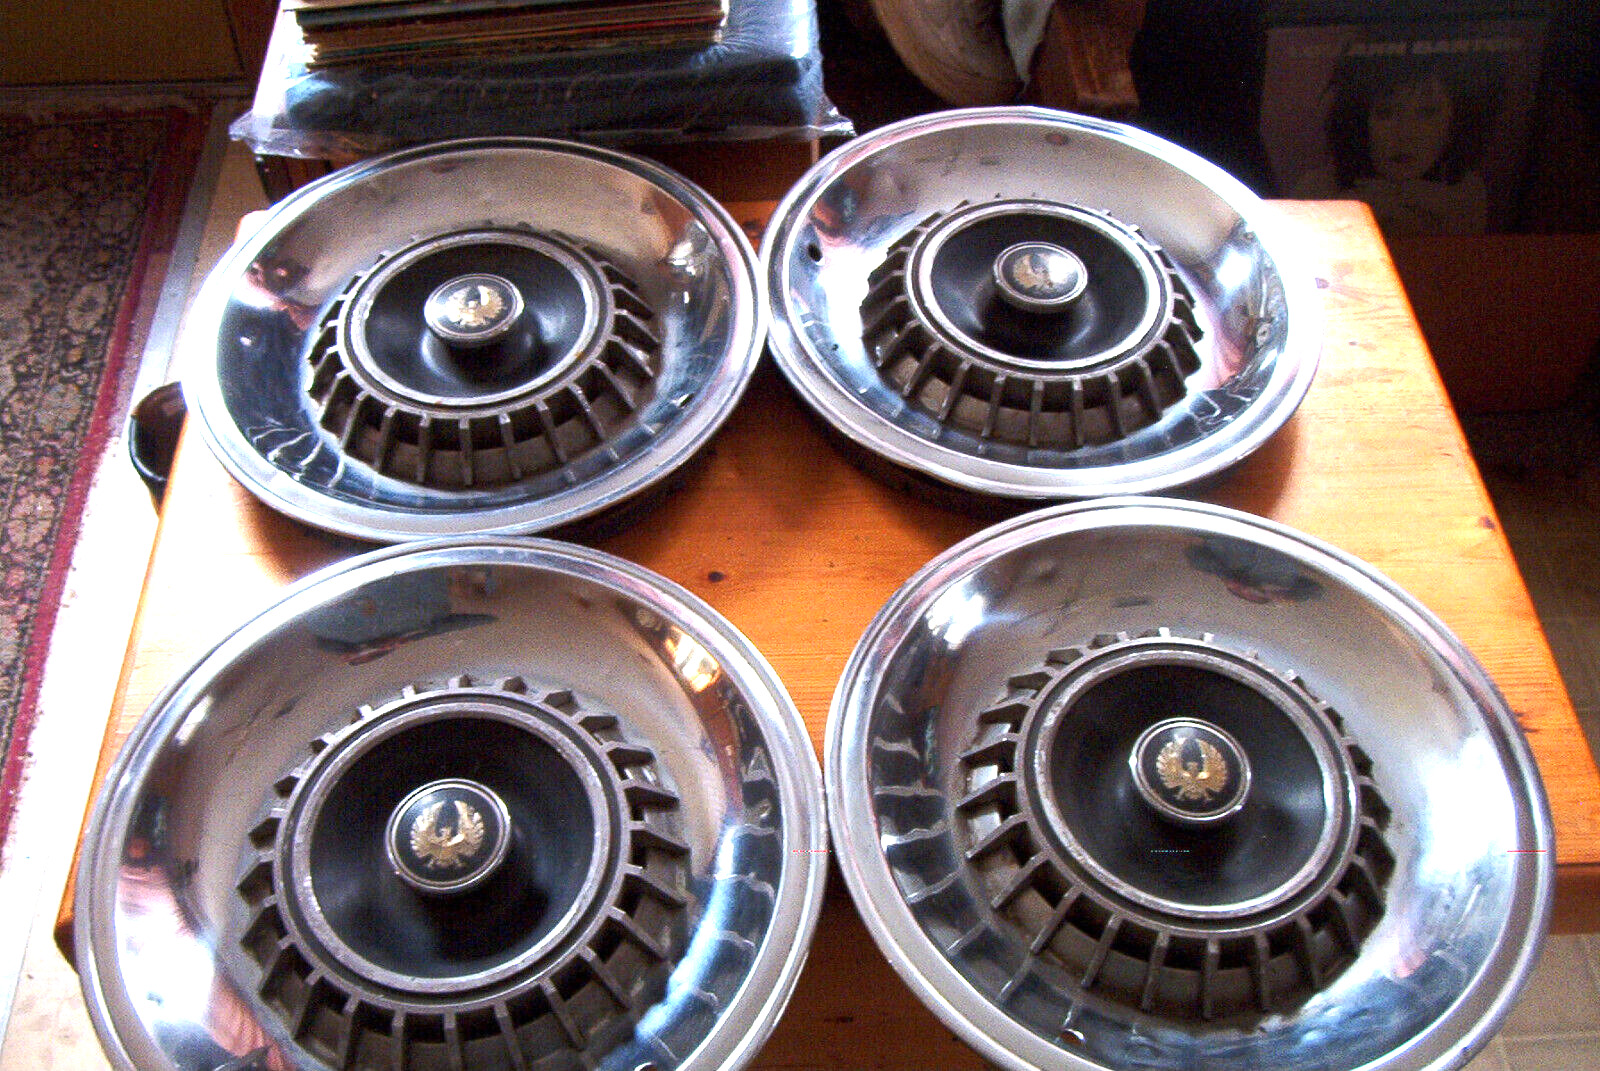 OE vintage set of 4  1964 Chrysler Imperial wheelcovers, black centers,free ship